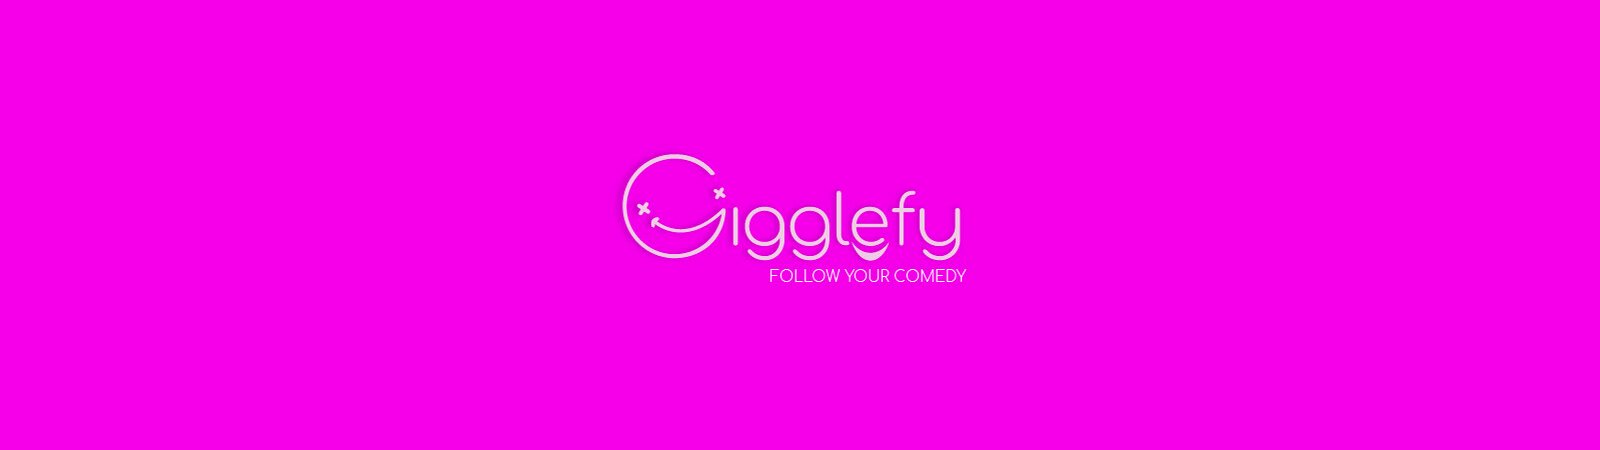 Gigglefy: Follow your comedy! Banner